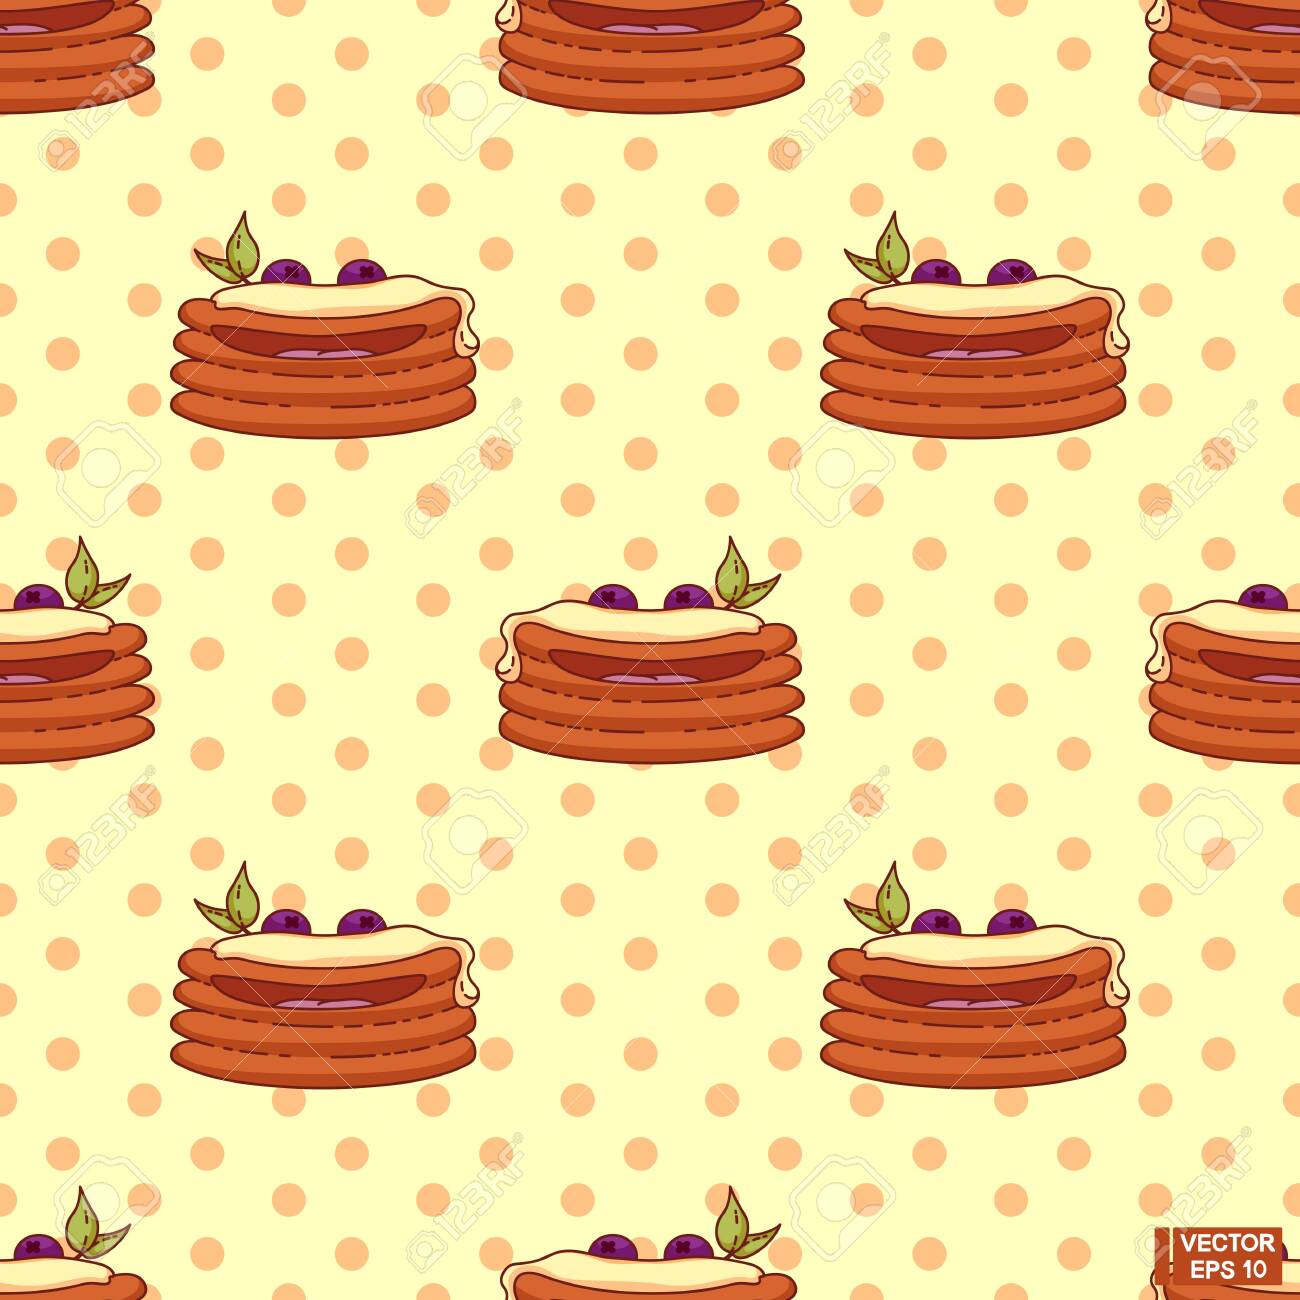 Vector Image Seamless Pattern With Pancakes Cartoon